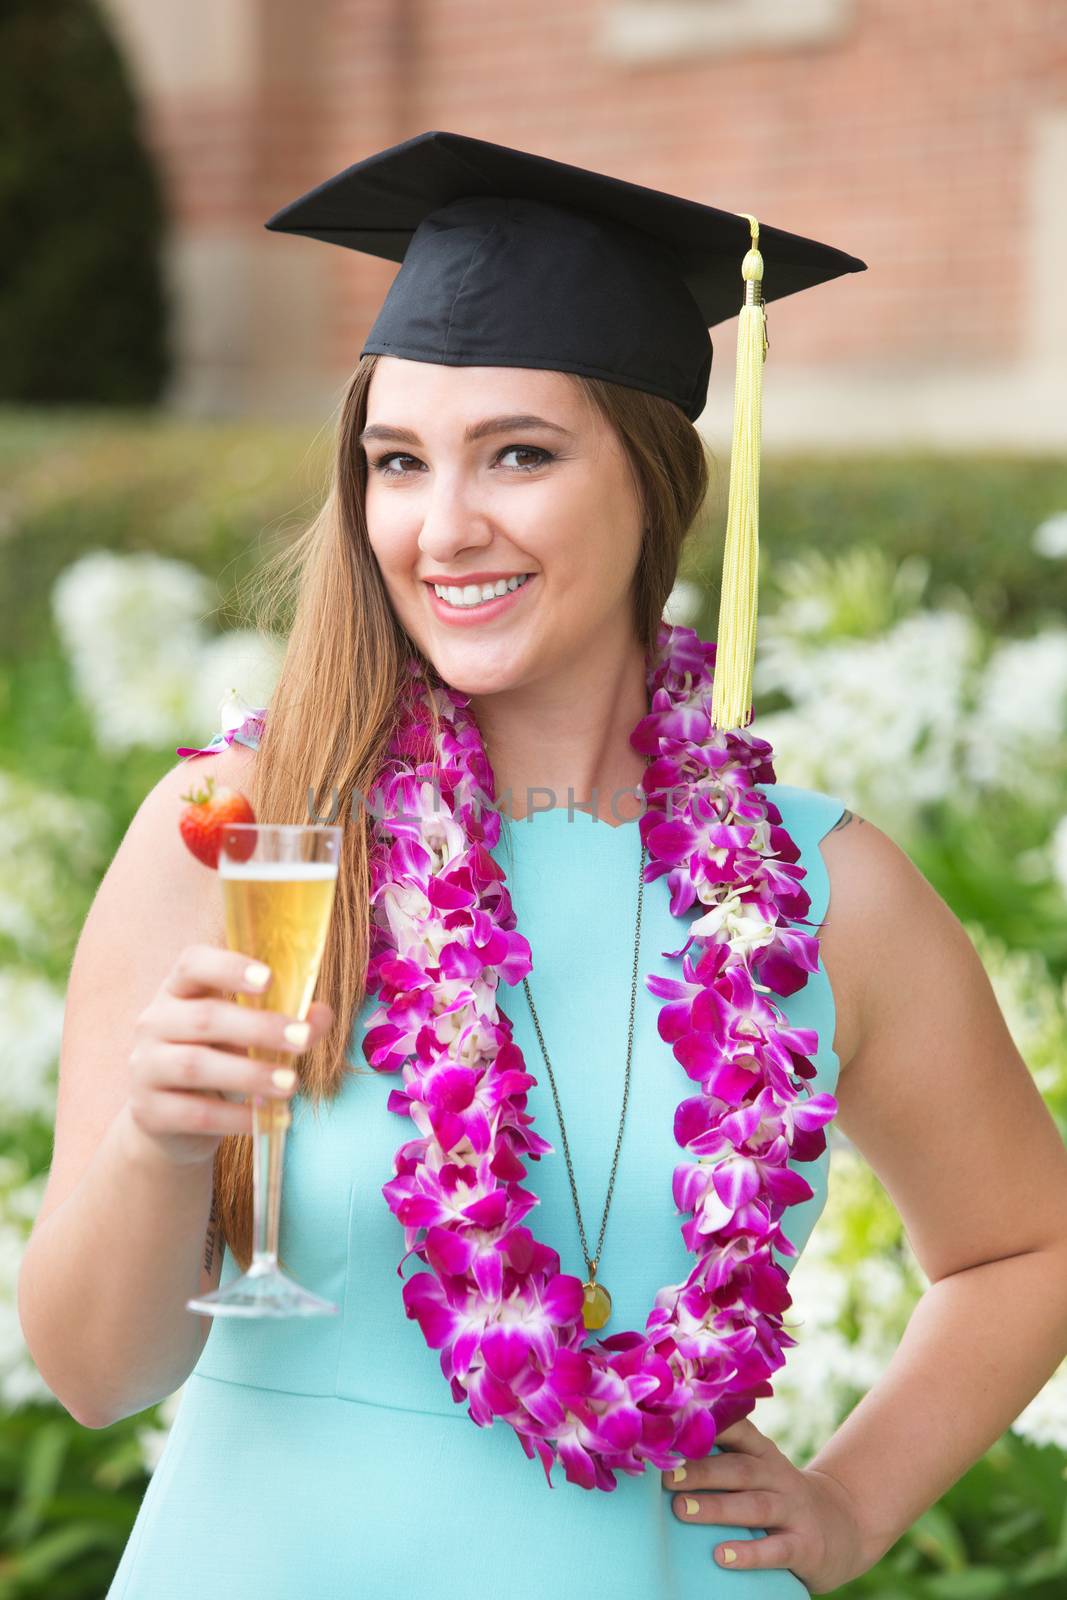 Smiling young female college student with boa and wine